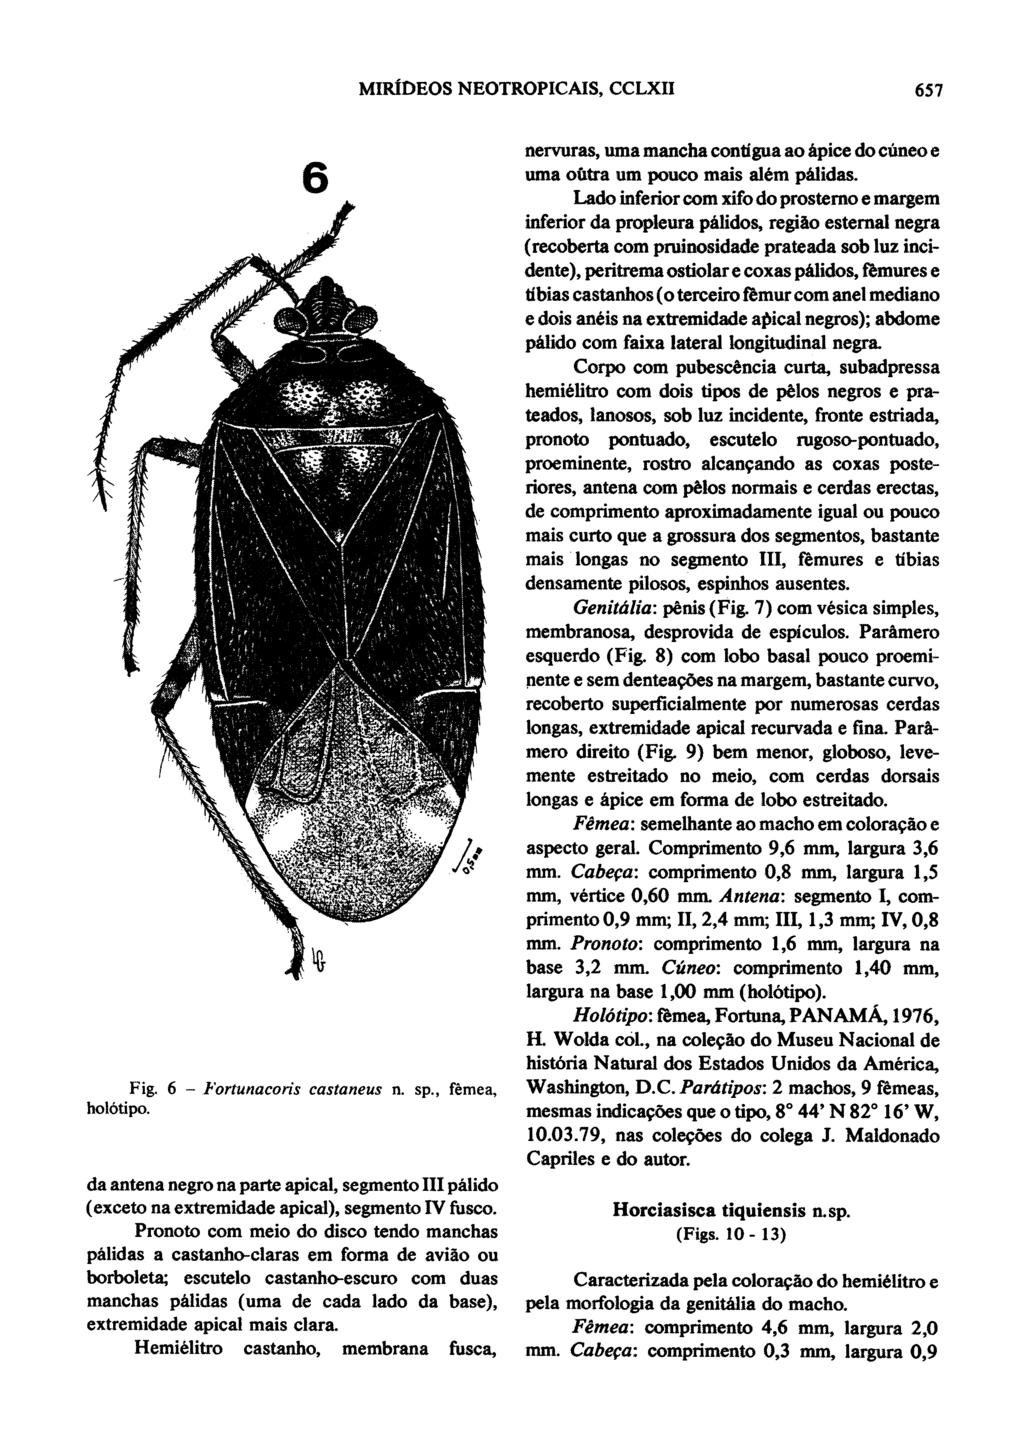 MIRIDEOS NEOTROPICAIS, CCLXII 657 I.. S \I 6 in-4 Fig. 6 - Fortunacoris castaneus n. sp., fmea, hol6tipo.